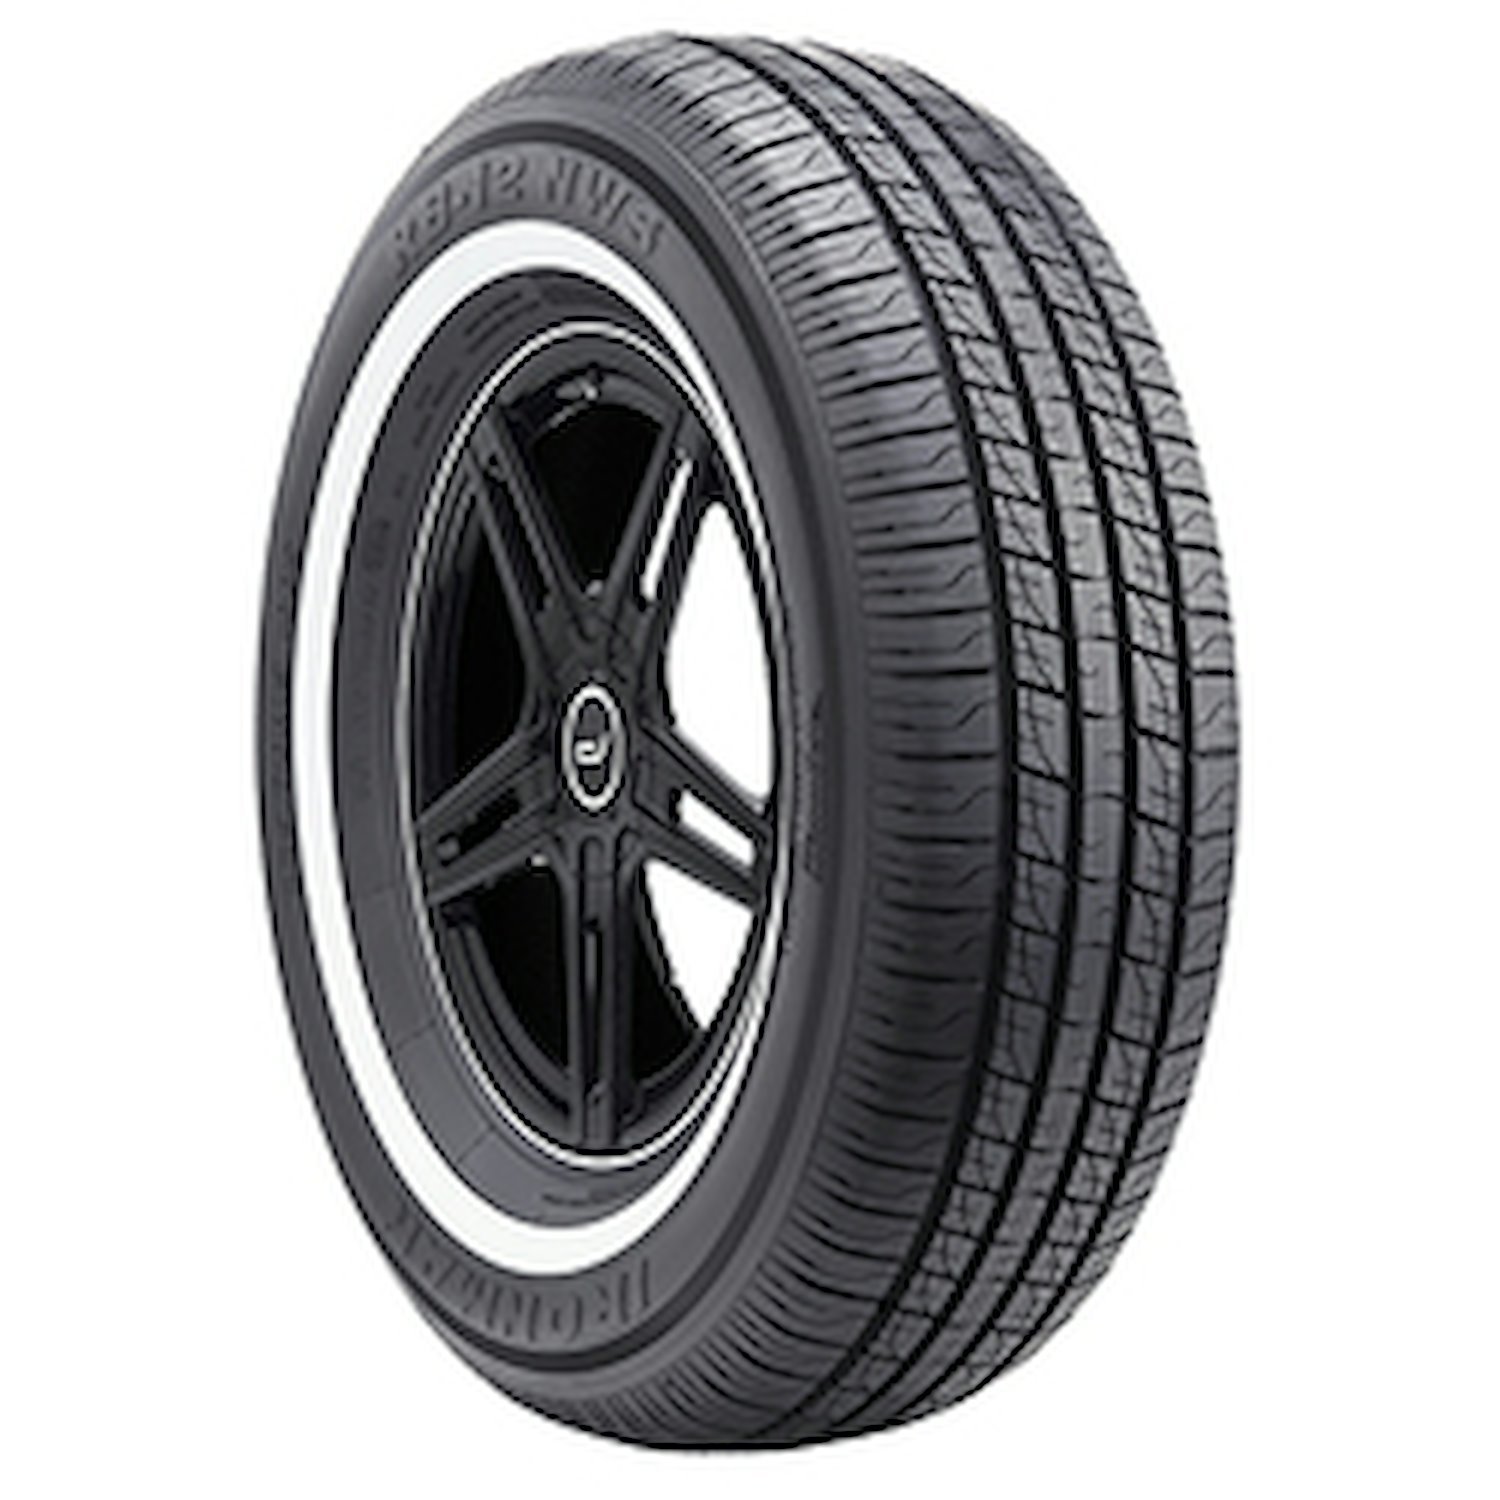 RB-12 NWS Tire, 215/75R15 100S